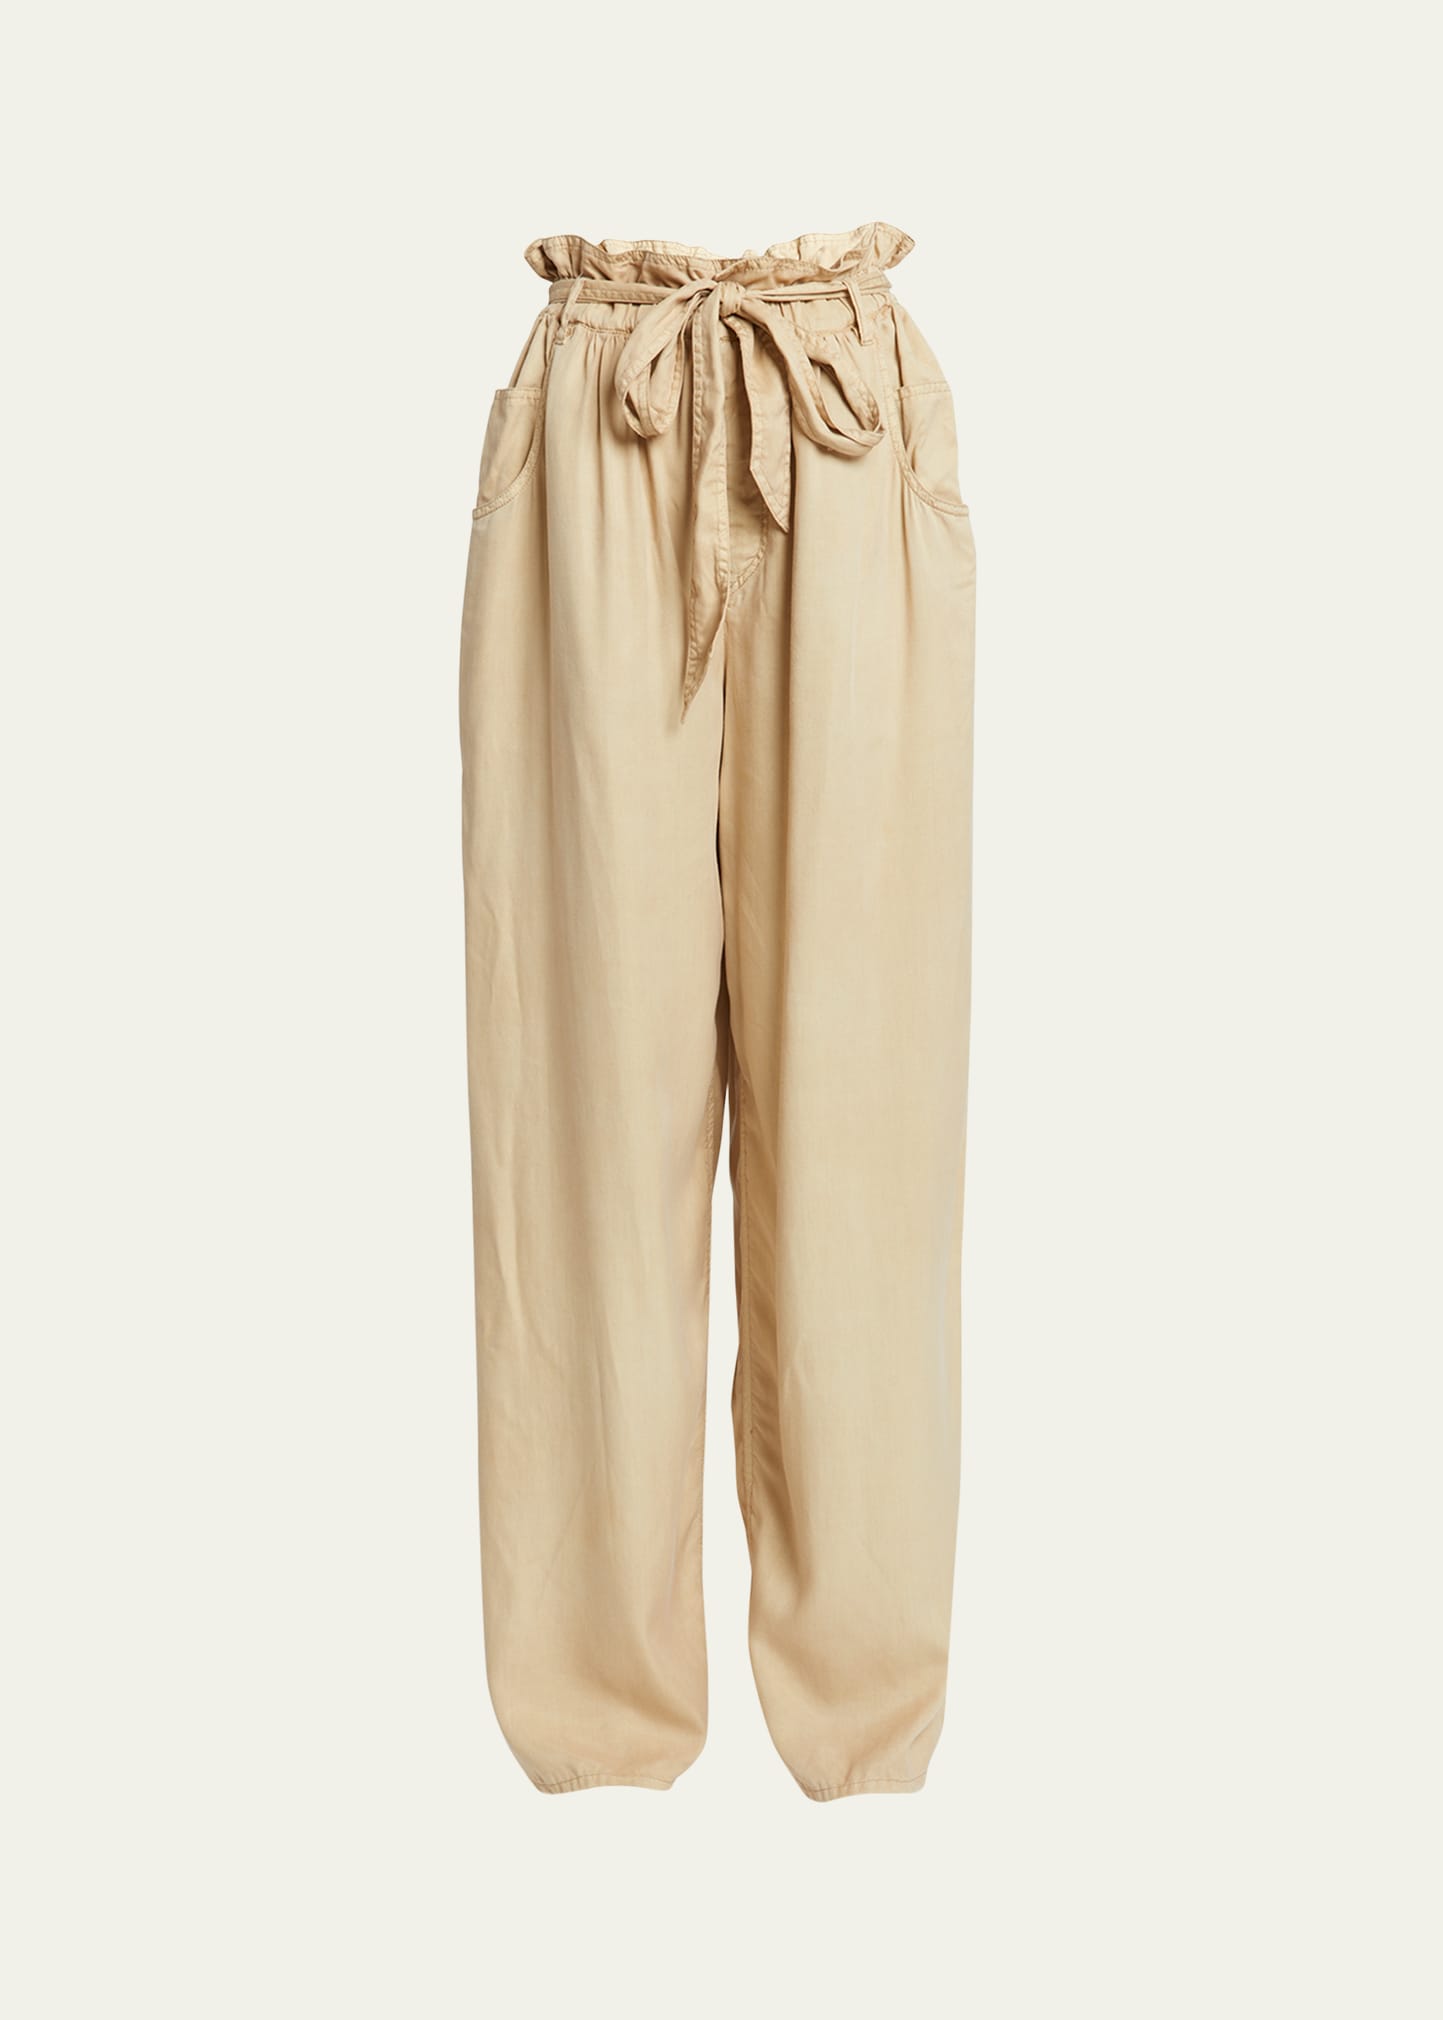 Priana Belted Paperbag Trousers